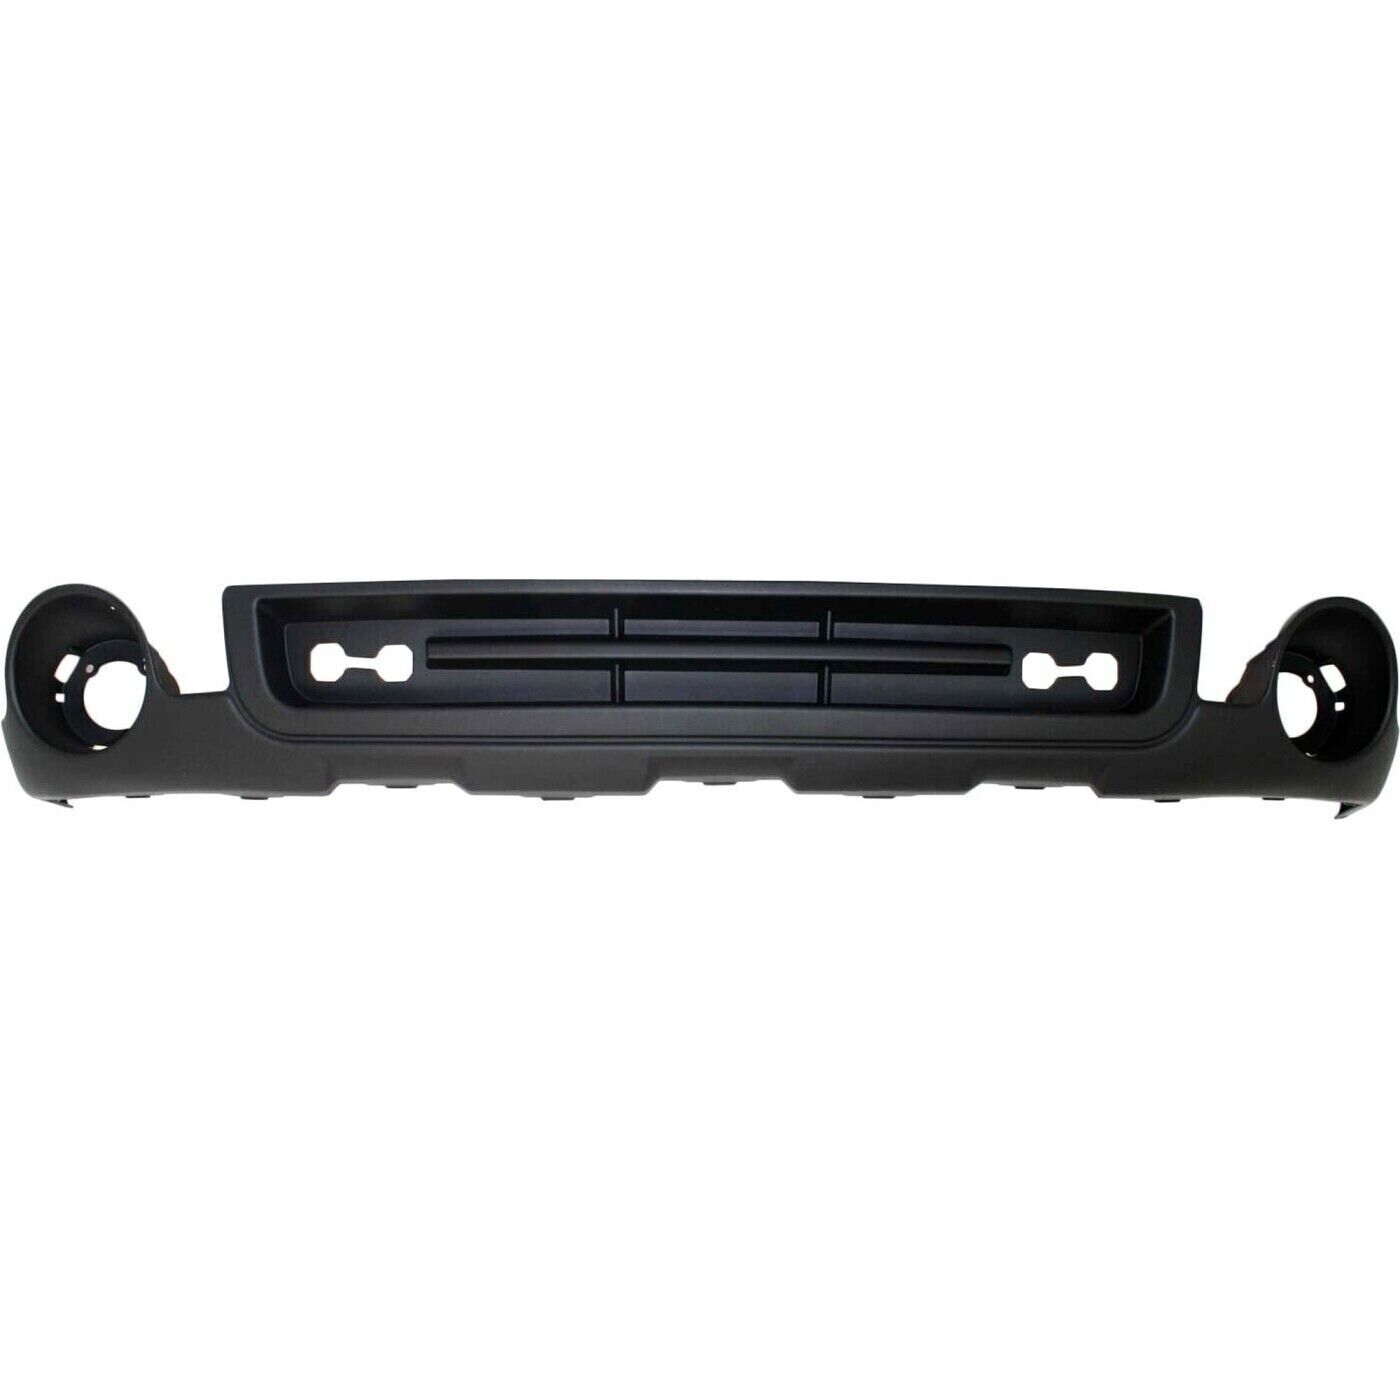 2007-2013 GMC SIERRA; Front Bumper Cover lower; Valance SLE/SLT/WT w/FL Hole Painted to Match